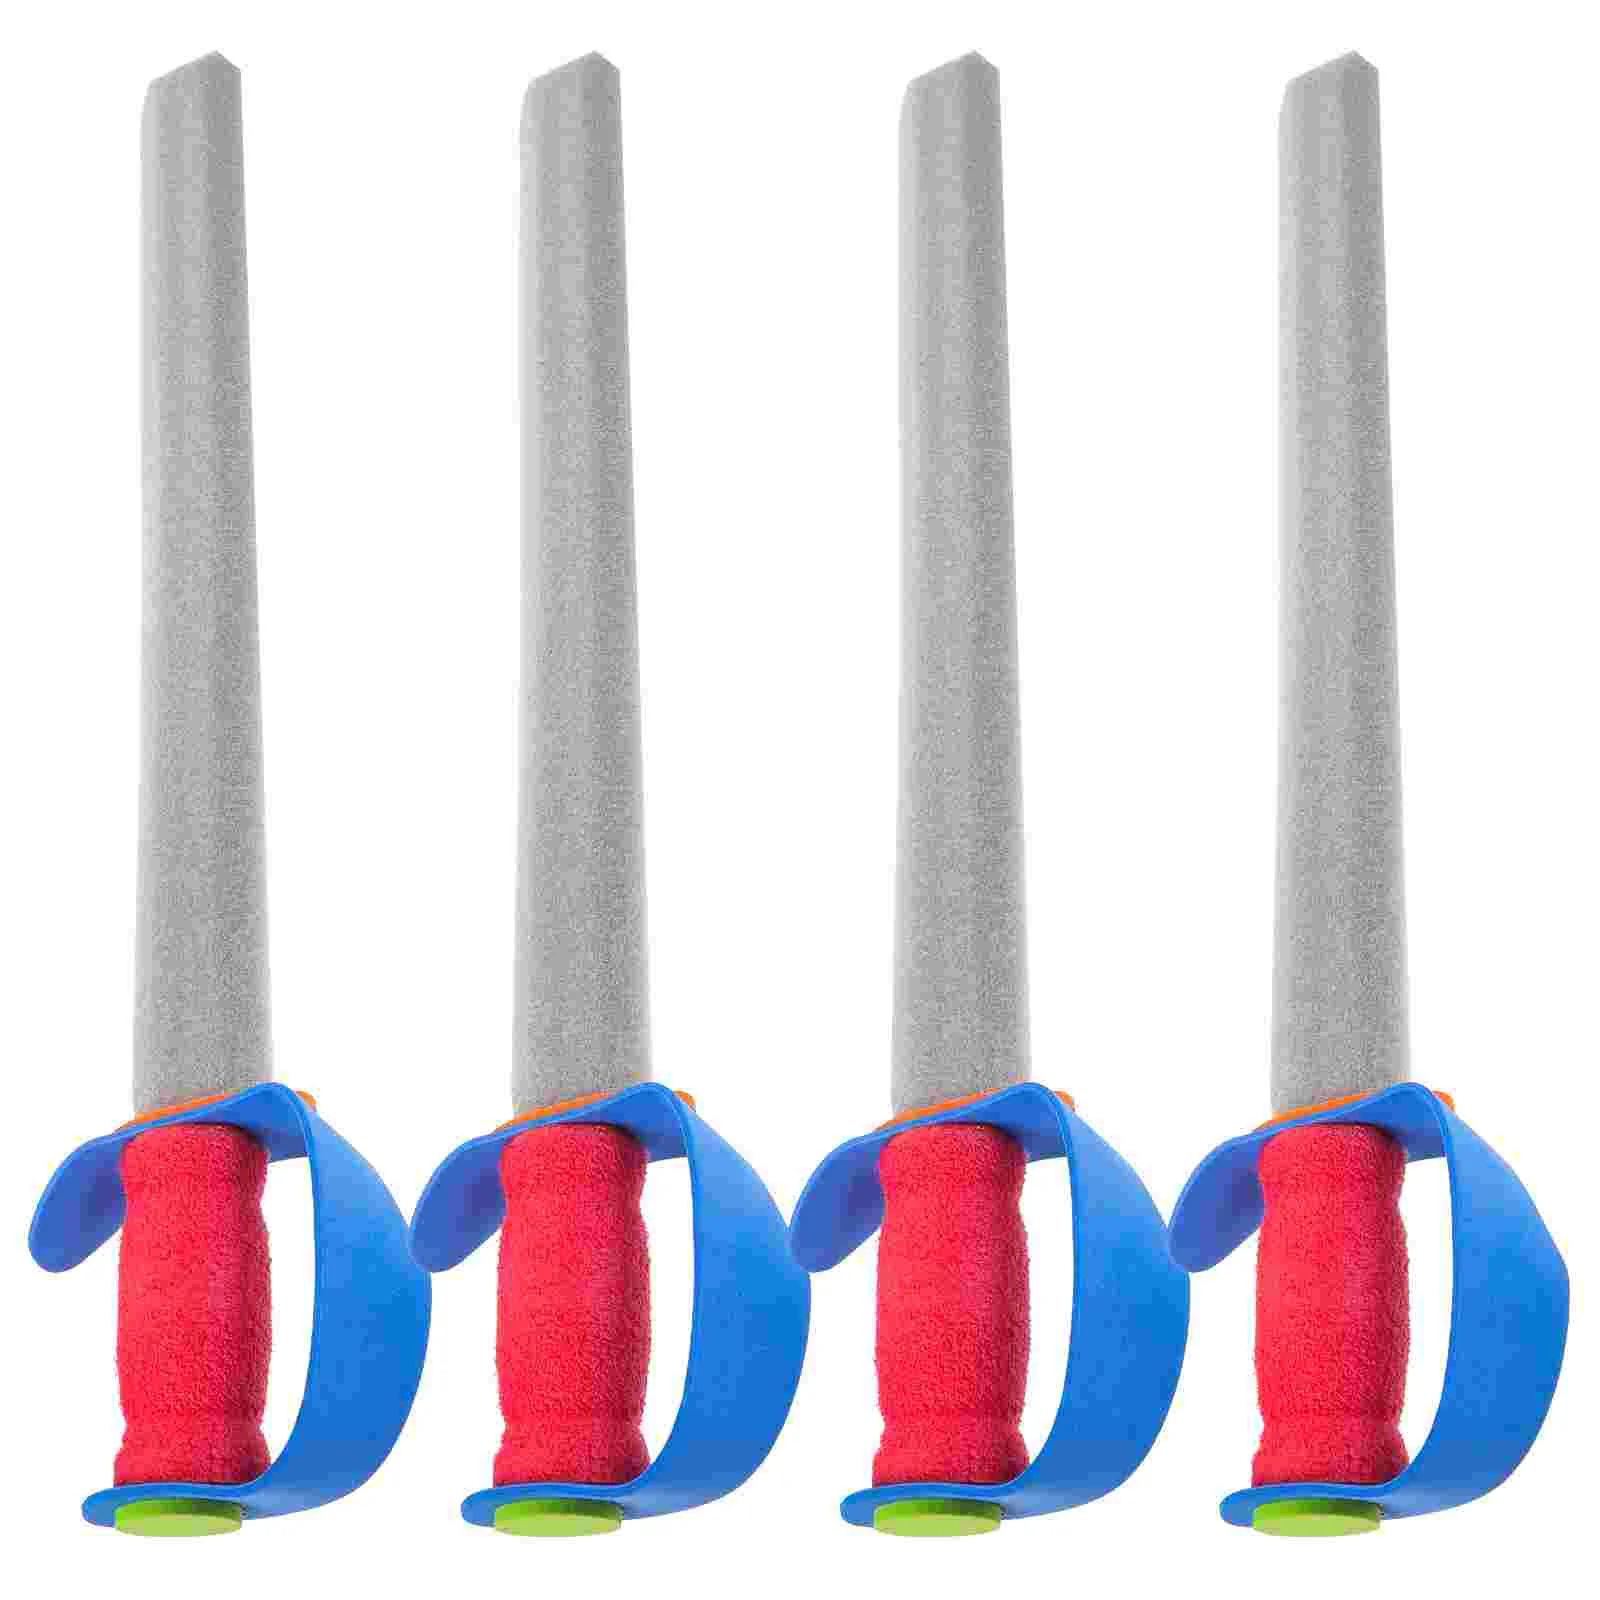 

4 Pcs Foams Plaything Swords Toy Toys Knight Kids Performance Safe Child Toddler